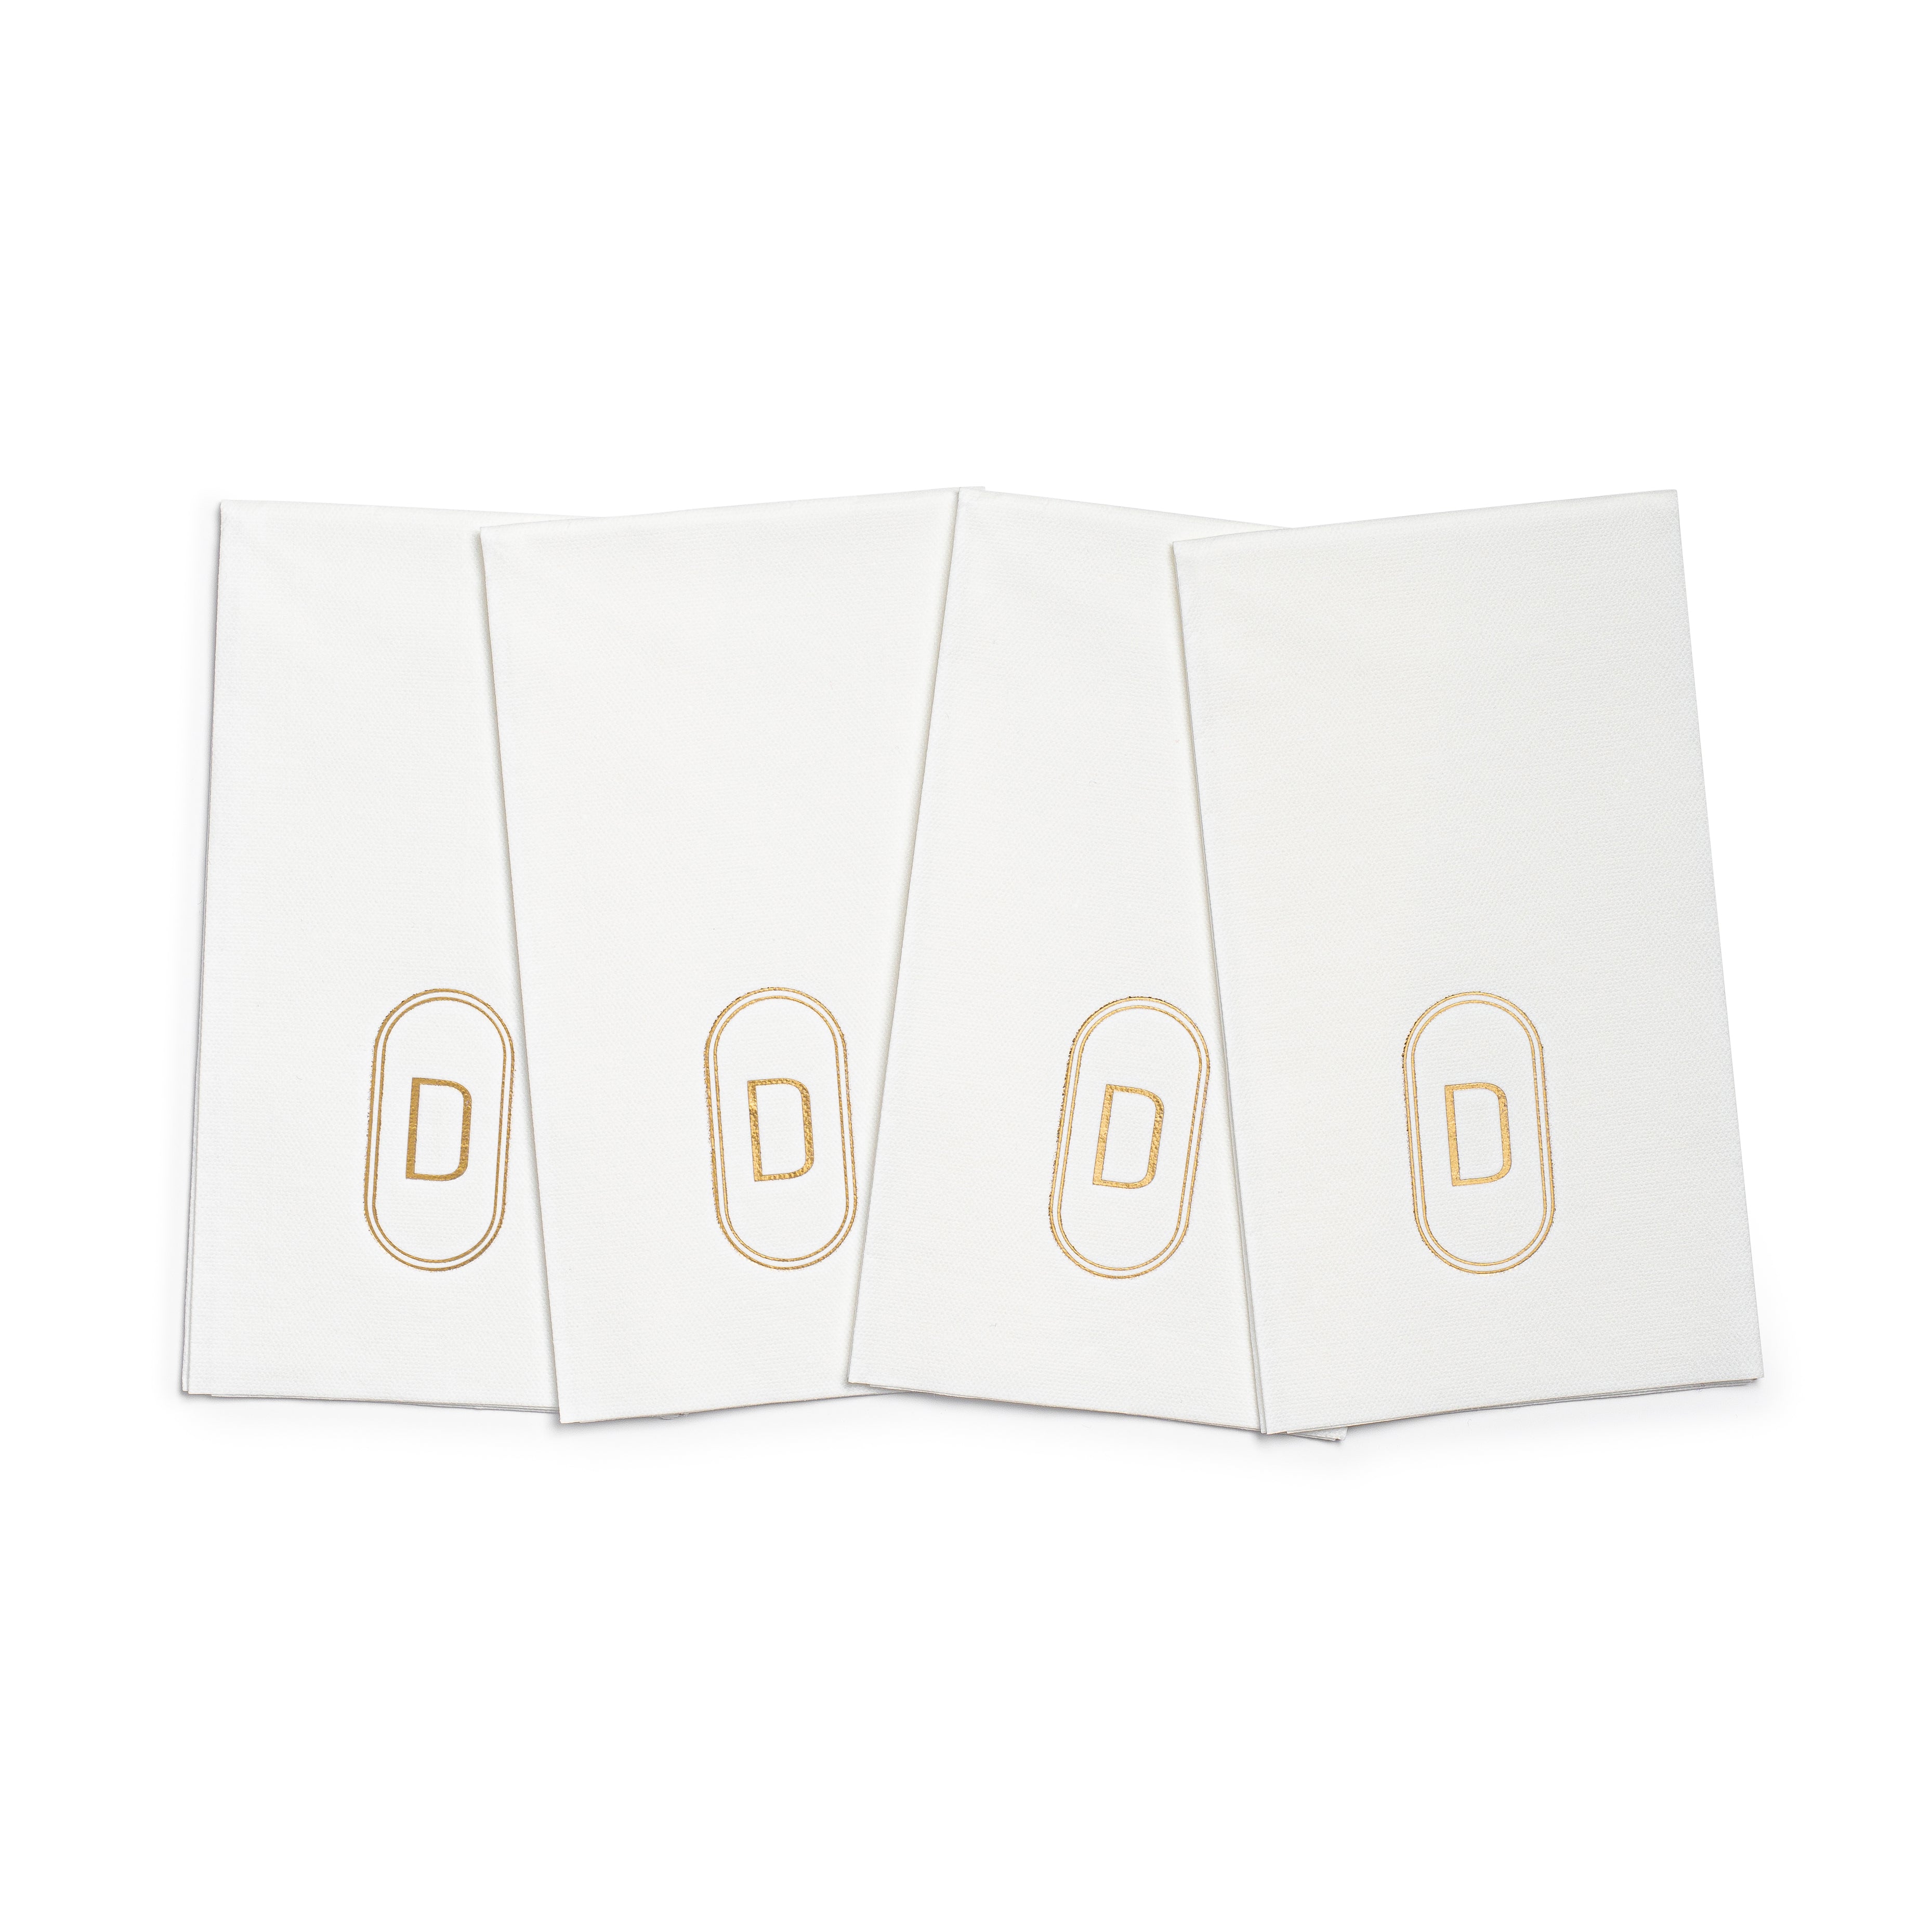 Gold Oval Napkins With Acrylic Tray Gift Set